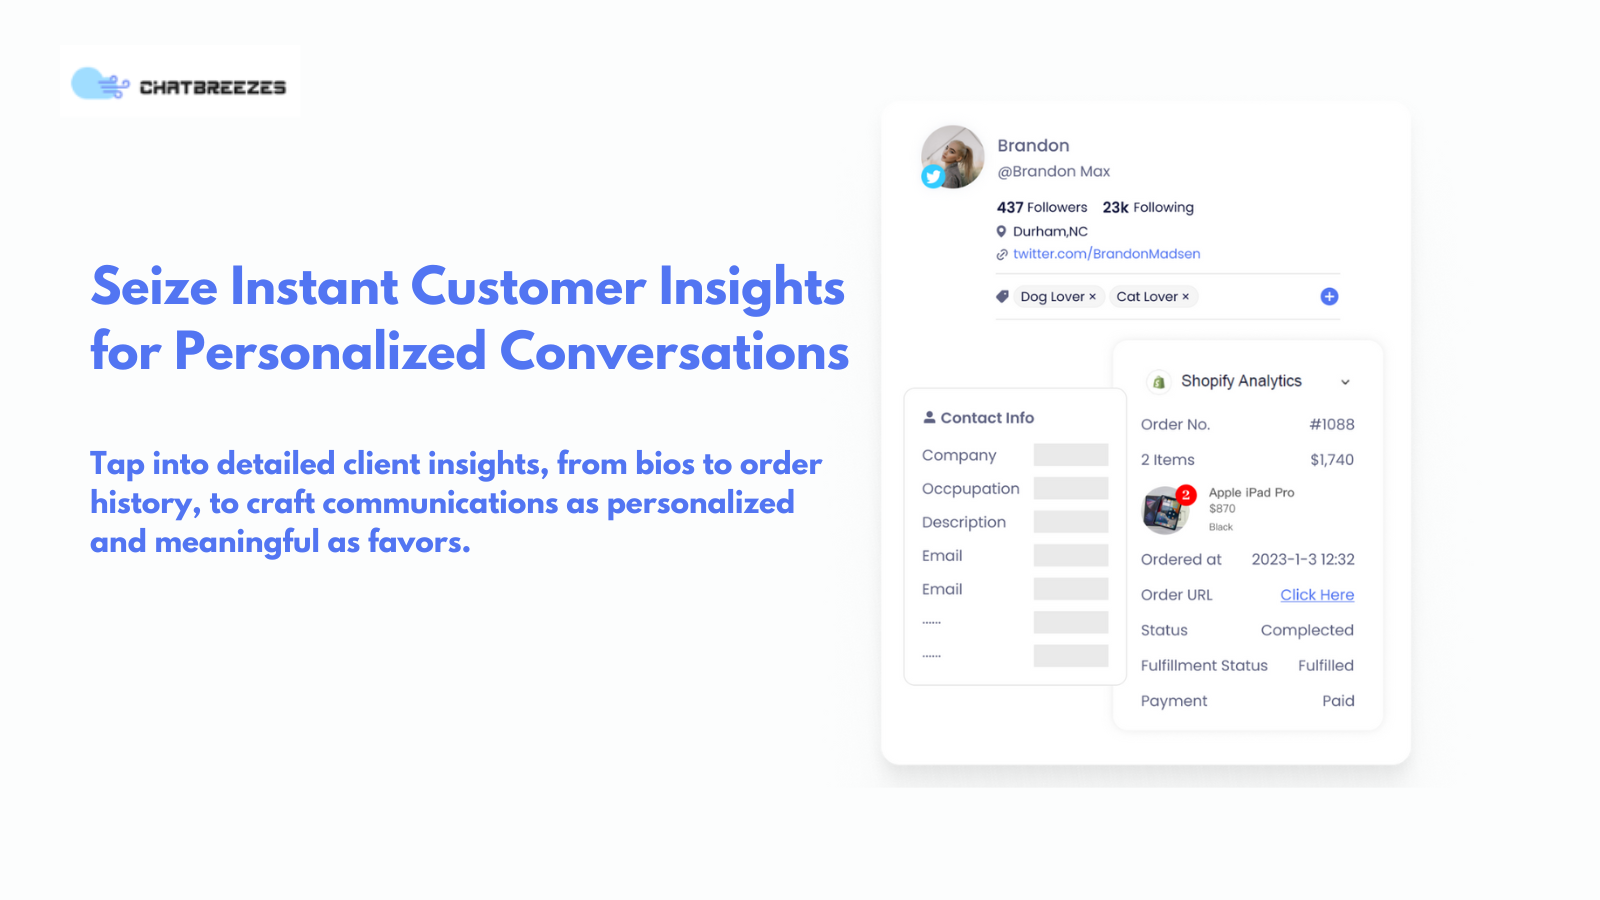 Seize Instant Customer Insights for Personalized Conversation